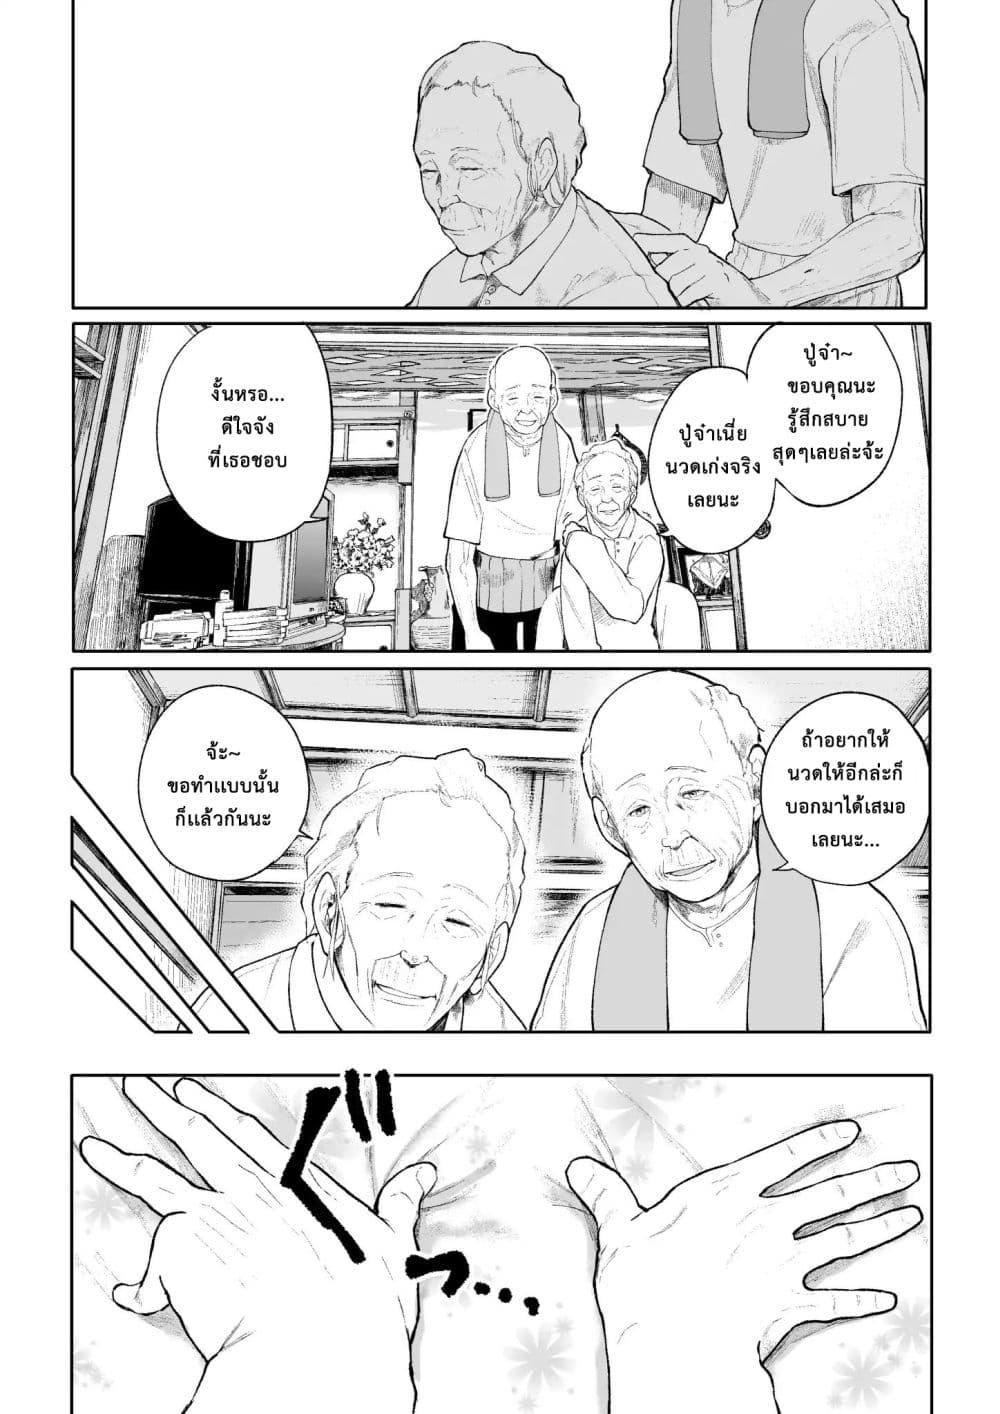 A Story About A Grampa and Granma Returned Back to their Youth 9-9